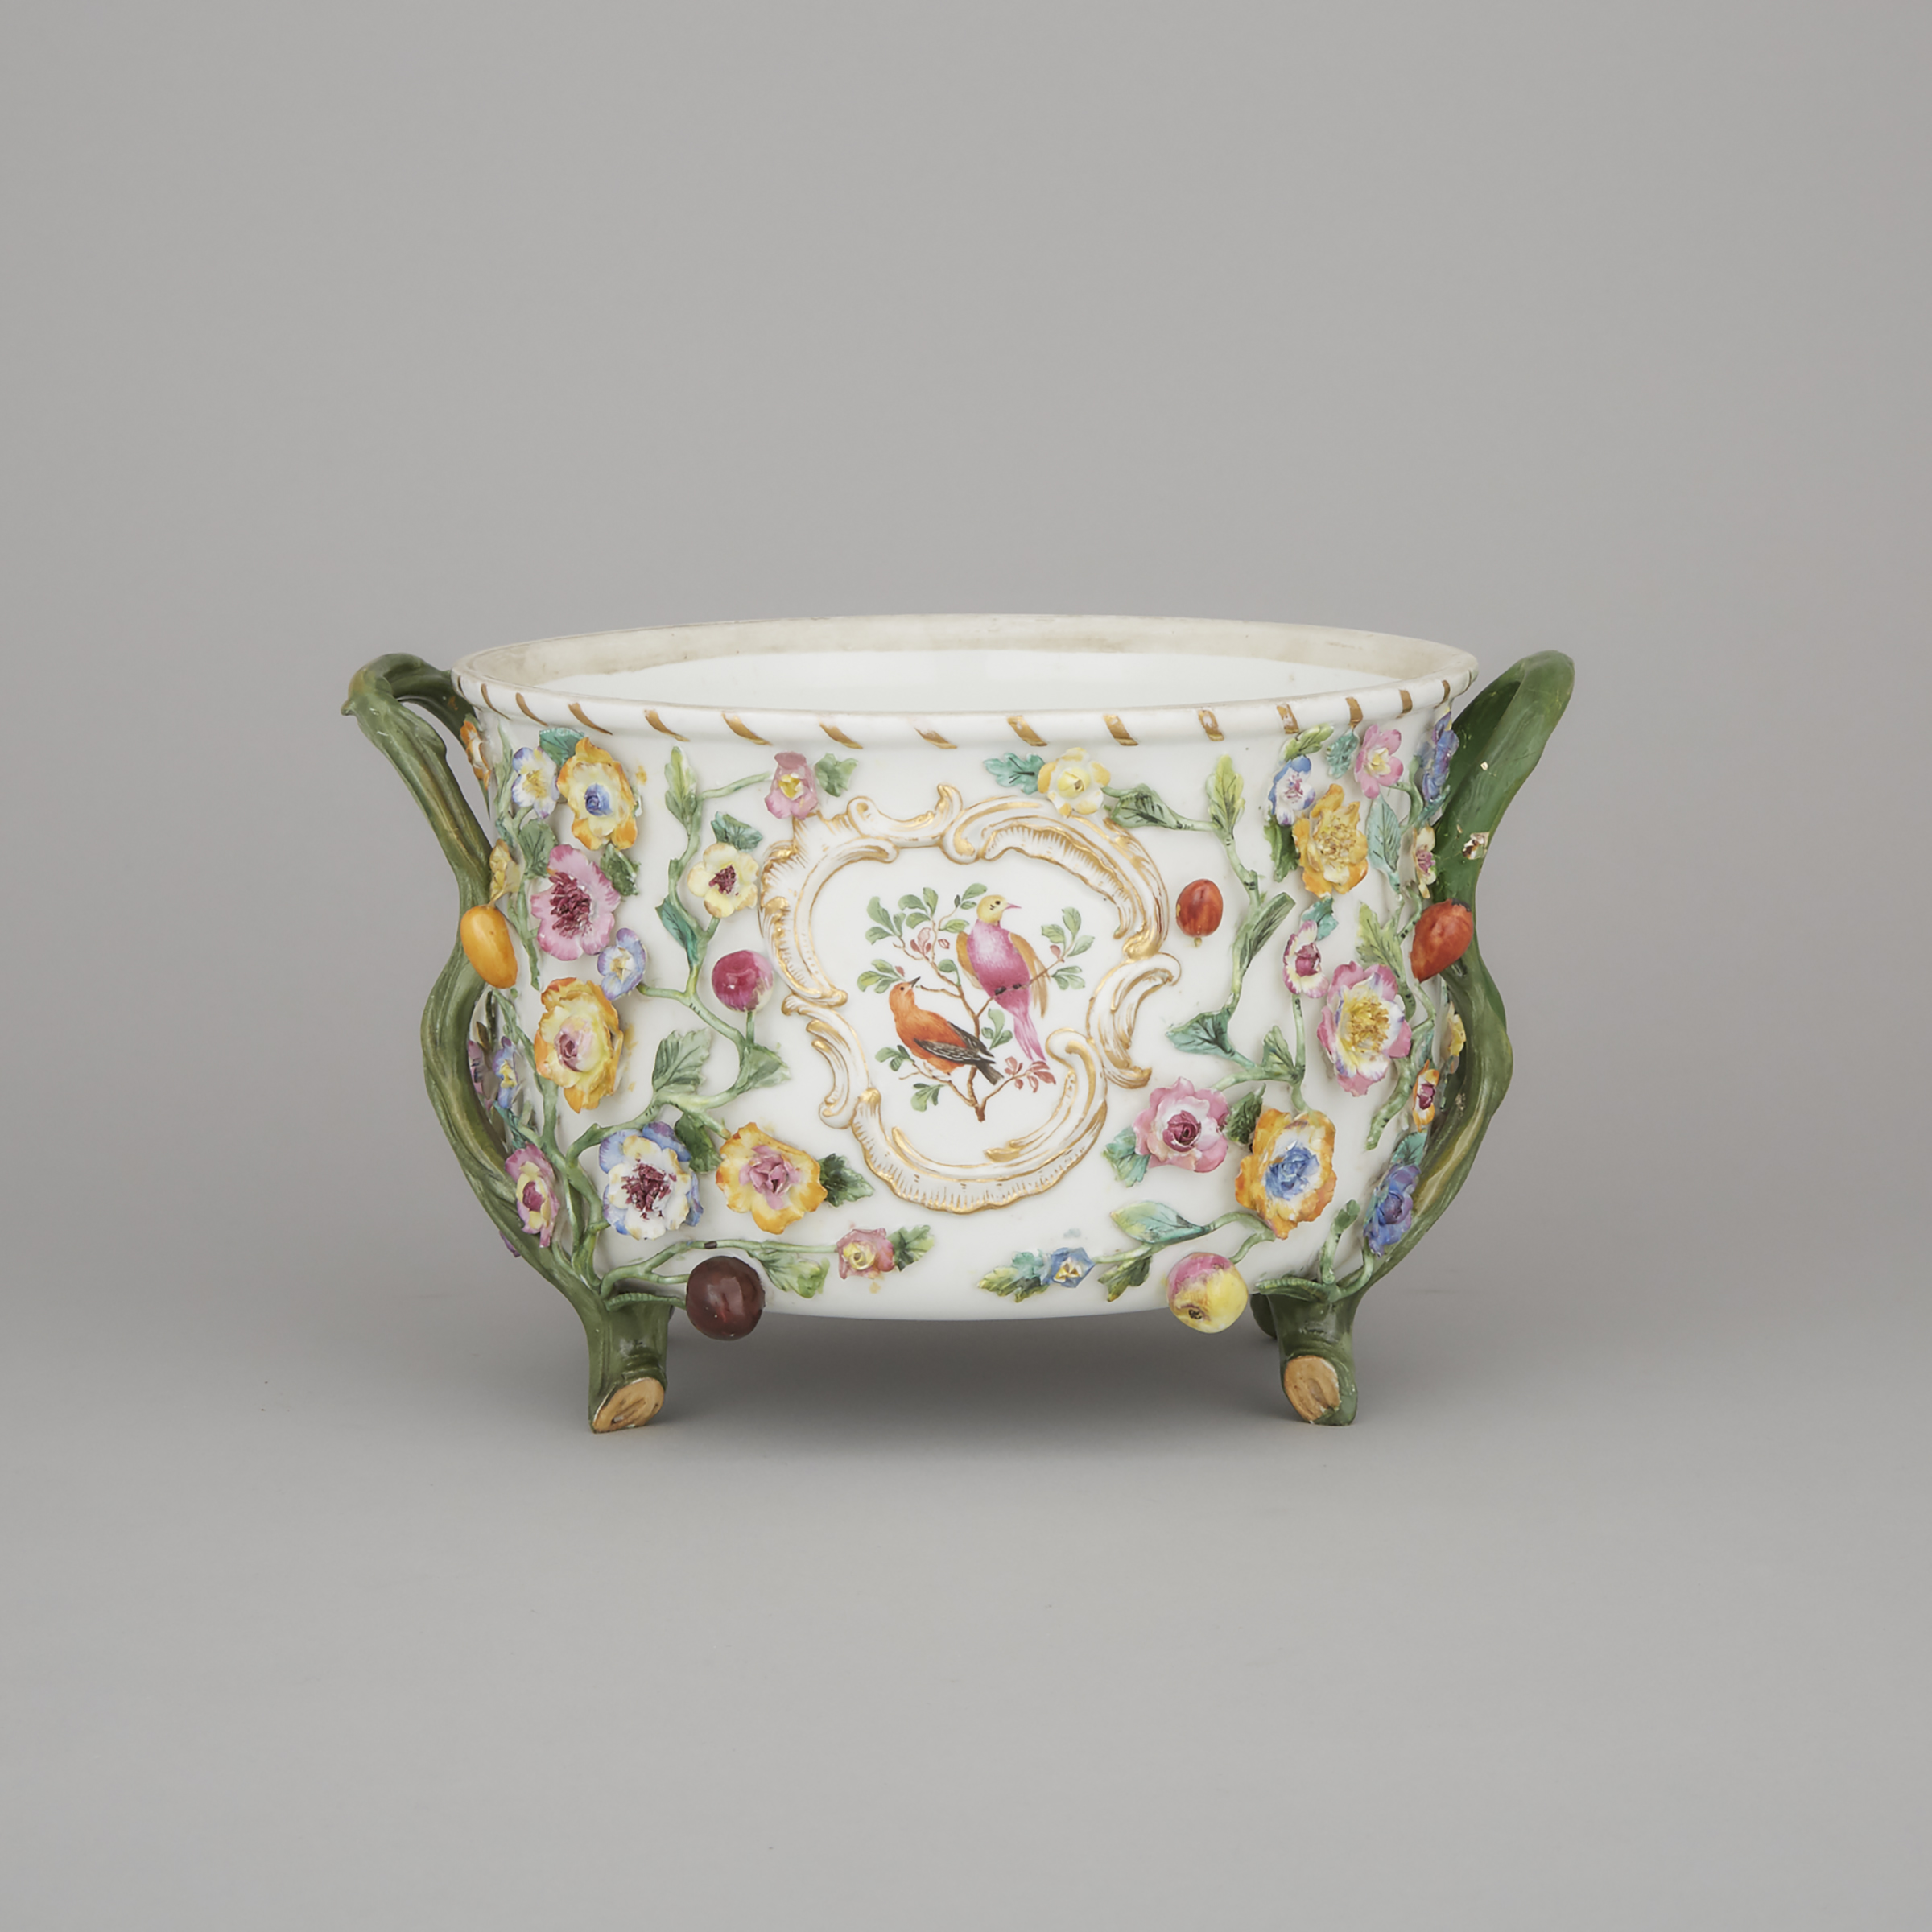 'Meissen' Flower-Encrusted Two-Handled Cachepot, late 19th century